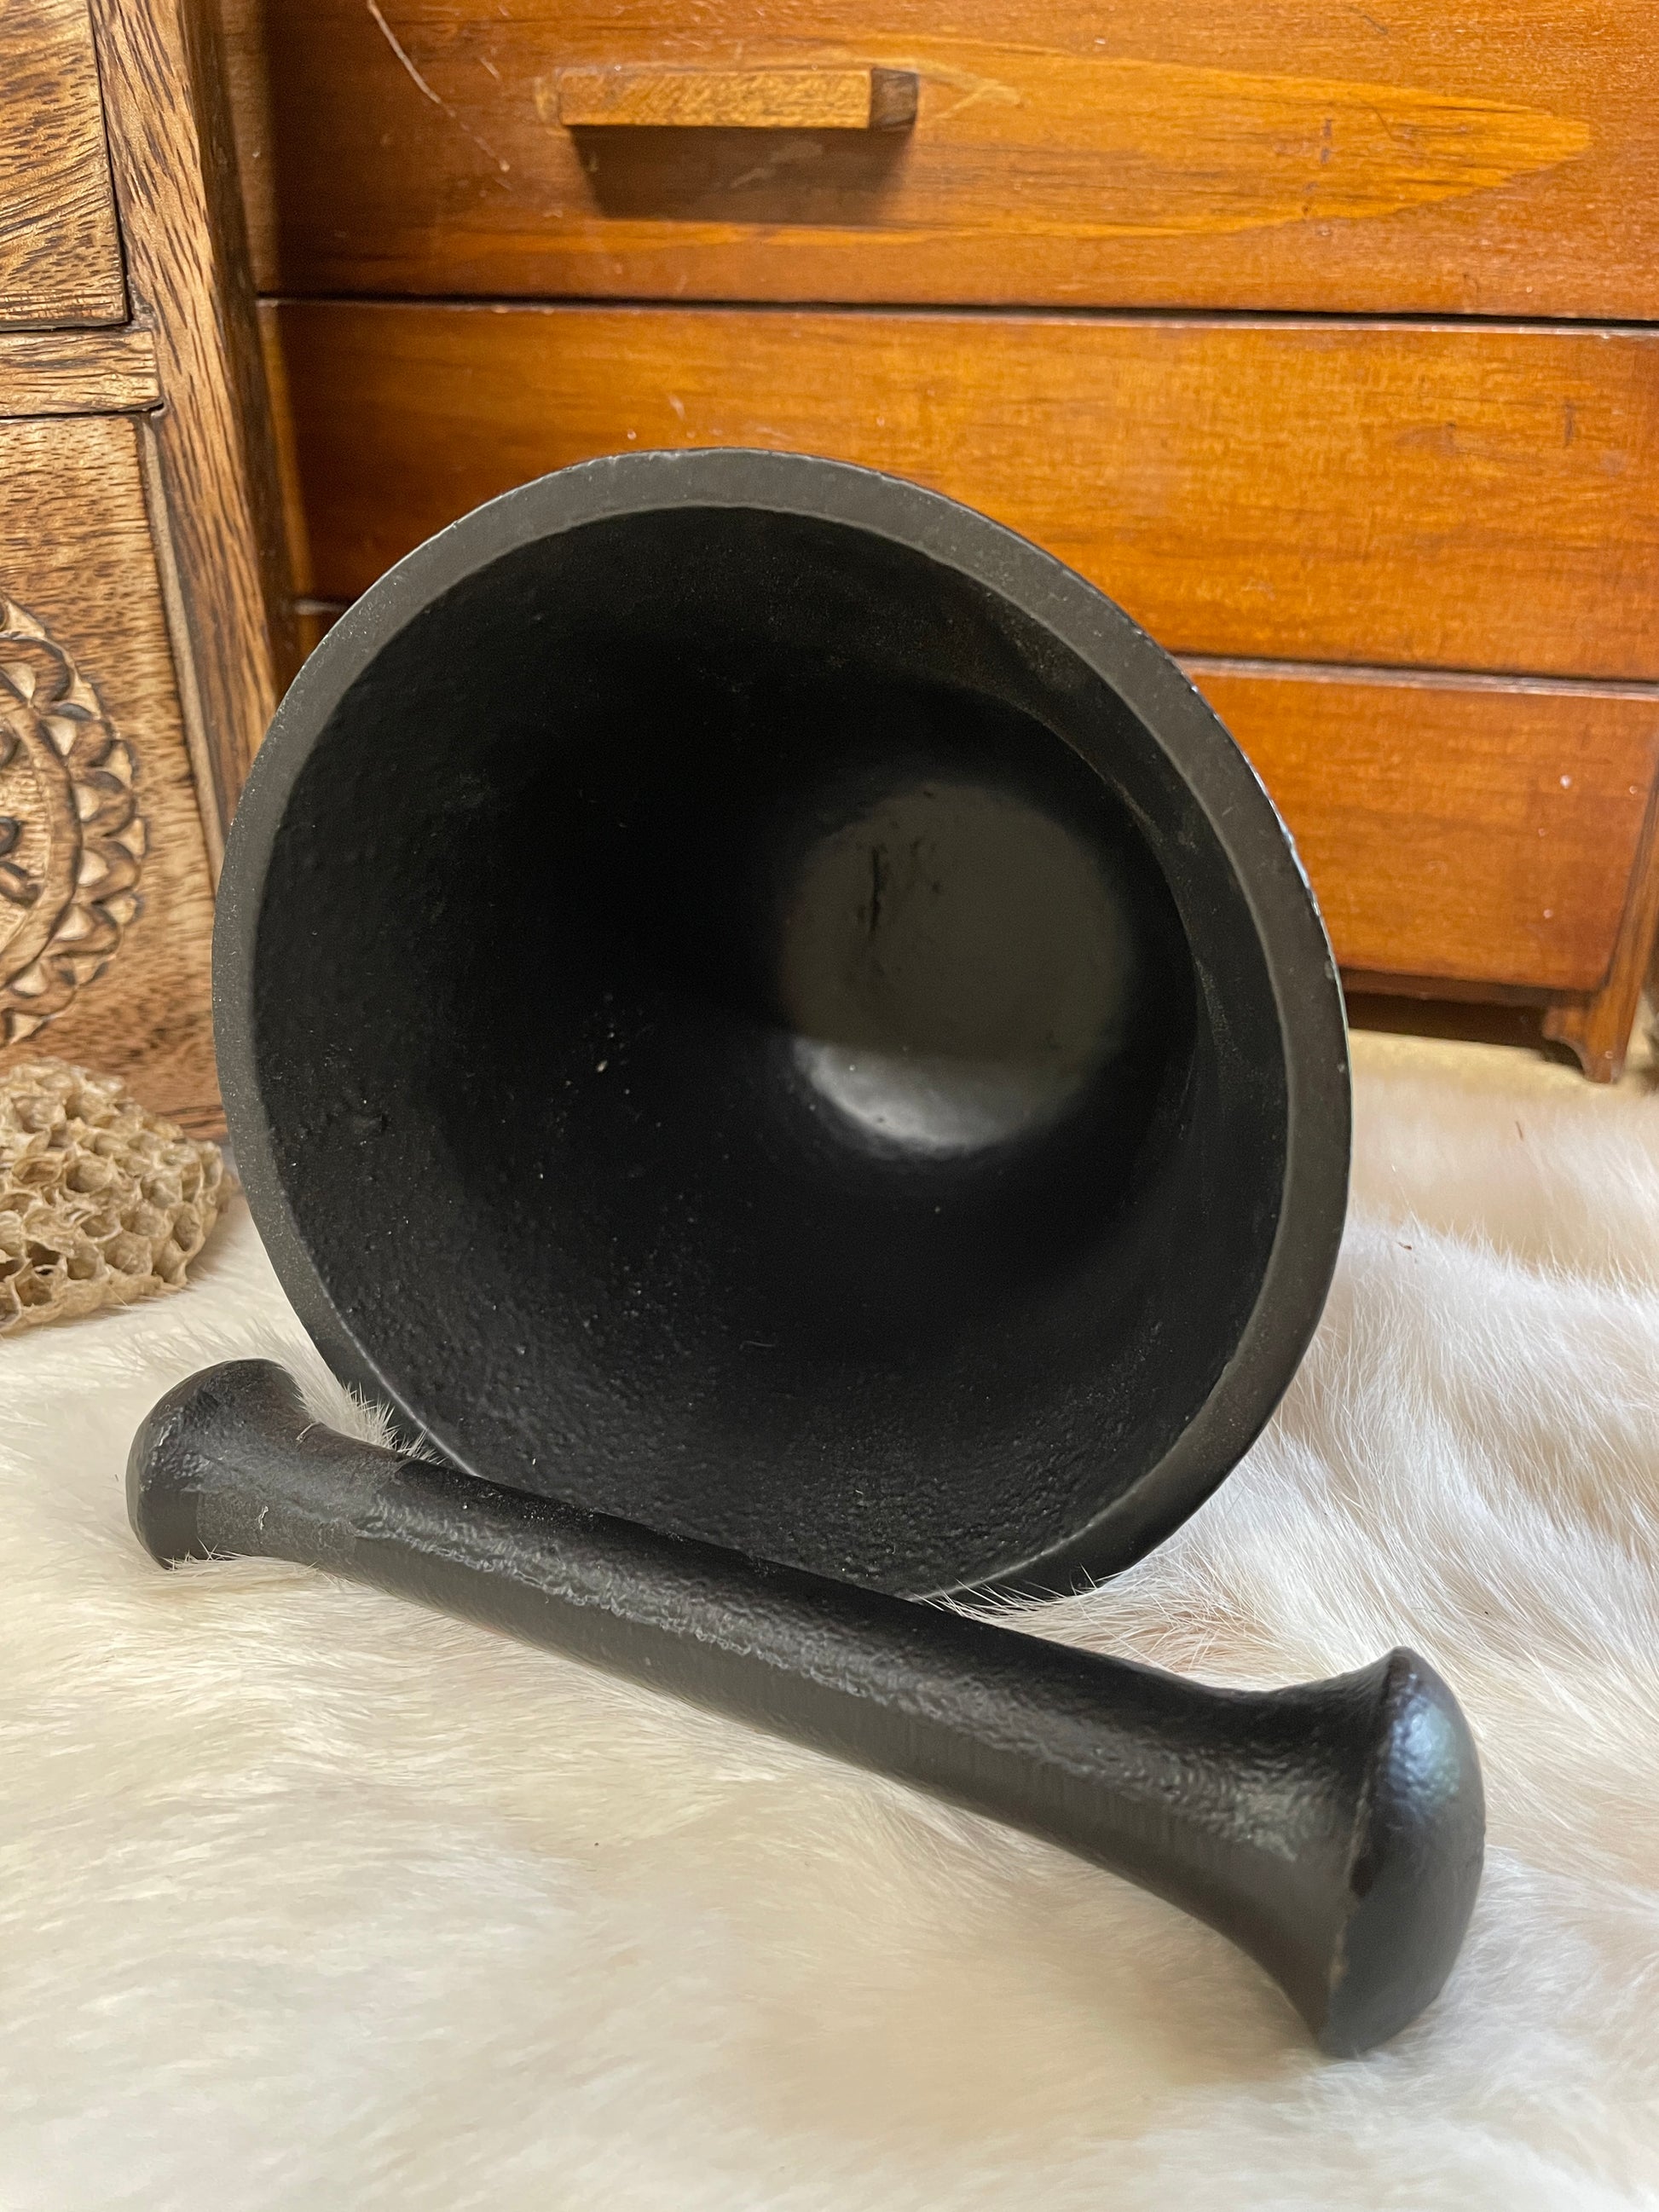 Products Cast Iron 4.5" Mortar and Pestle | Grinding Herbs Spices Resins and Wood | Smudging Small Cauldron | Altar Decoration